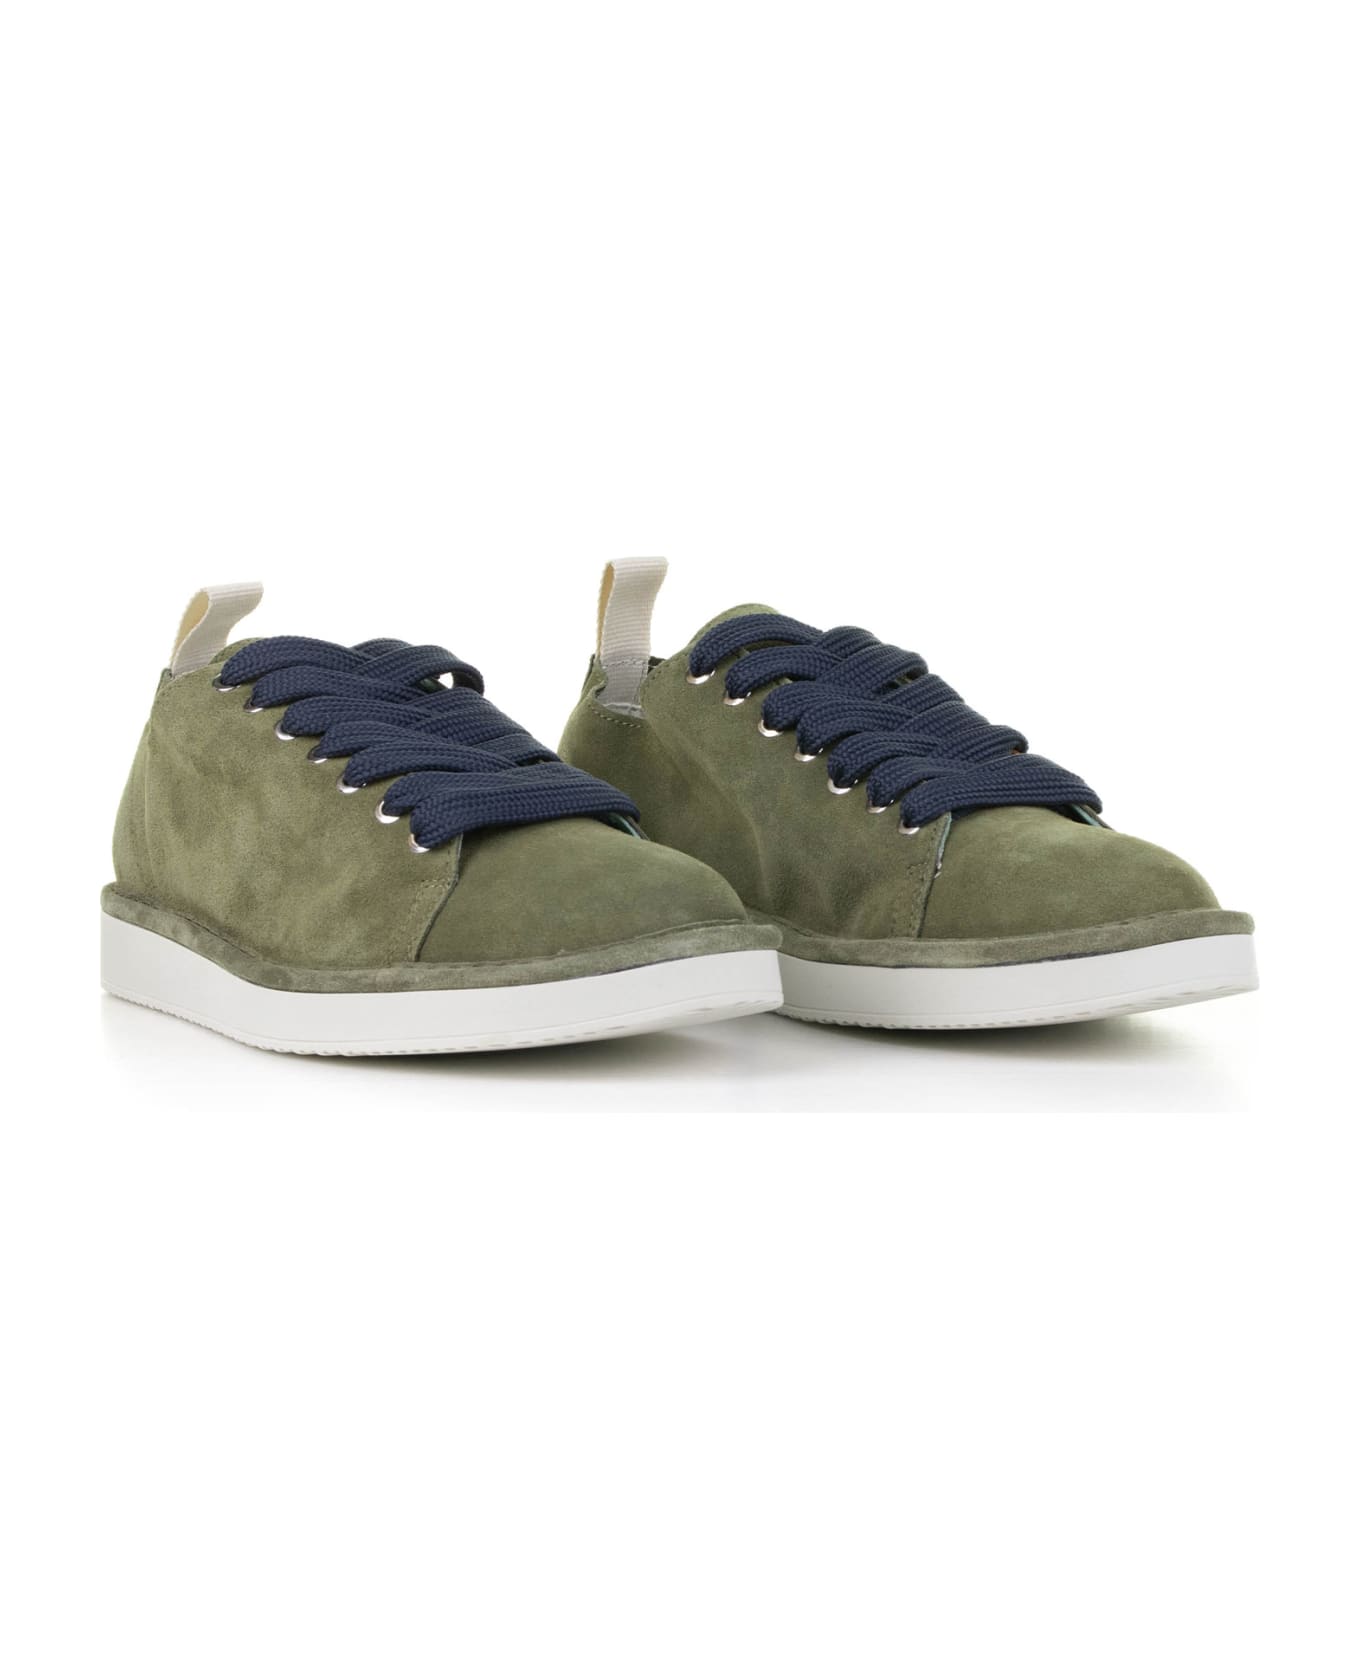 Panchic Sneaker In Military Green Suede - FOREST-NIGHT COBALT